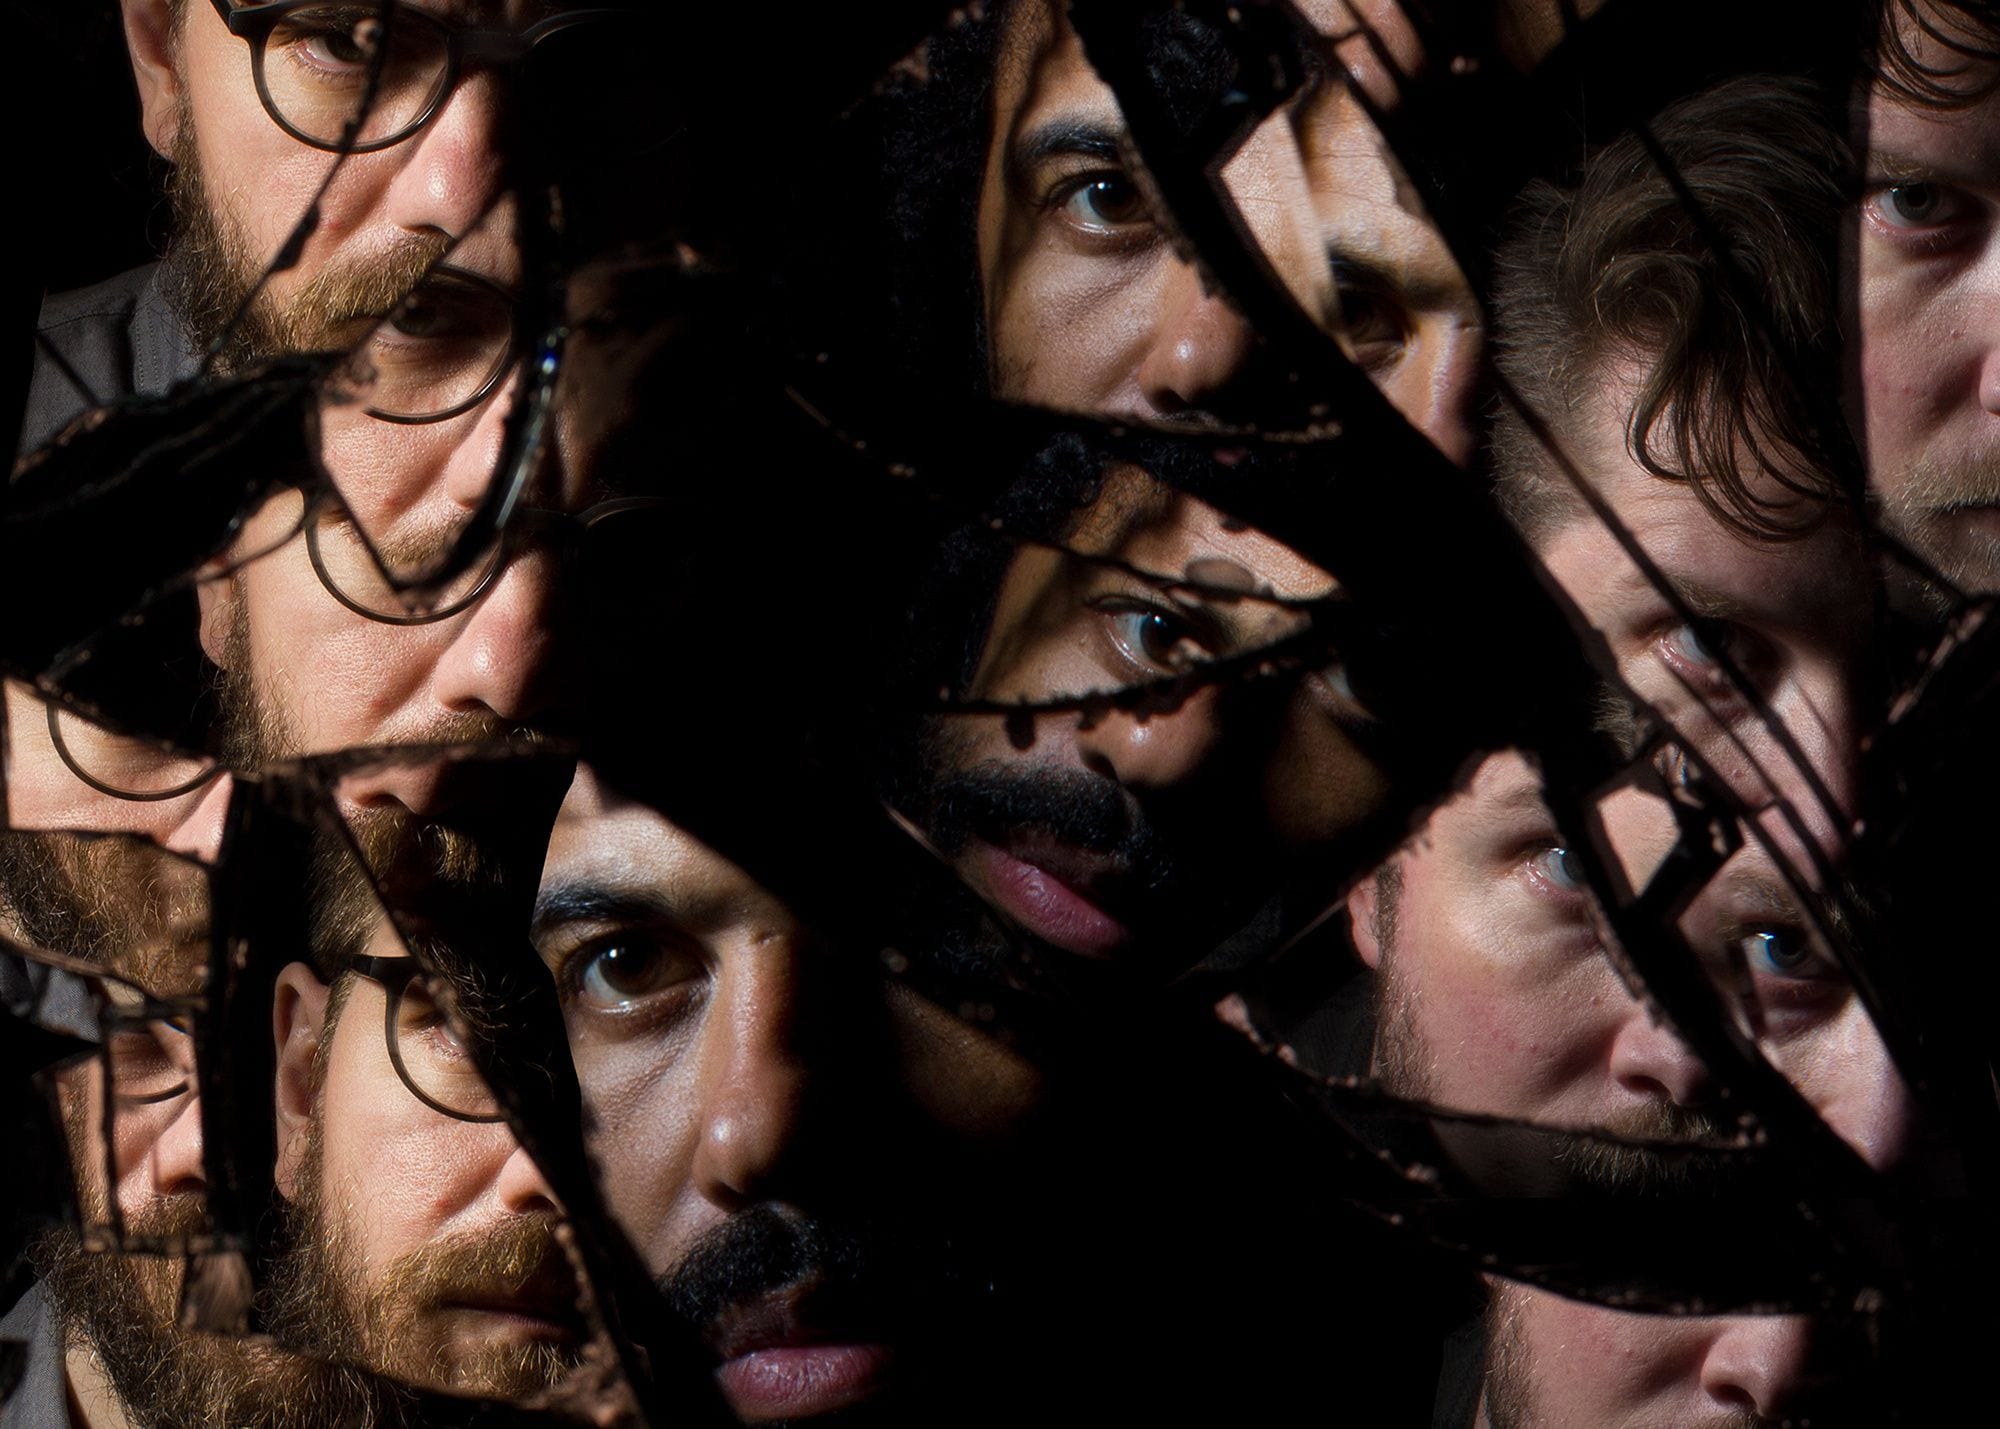 Clipping Take a Stab at Horrorcore with the Fiery ‘Visions of Bodies Being Burned’